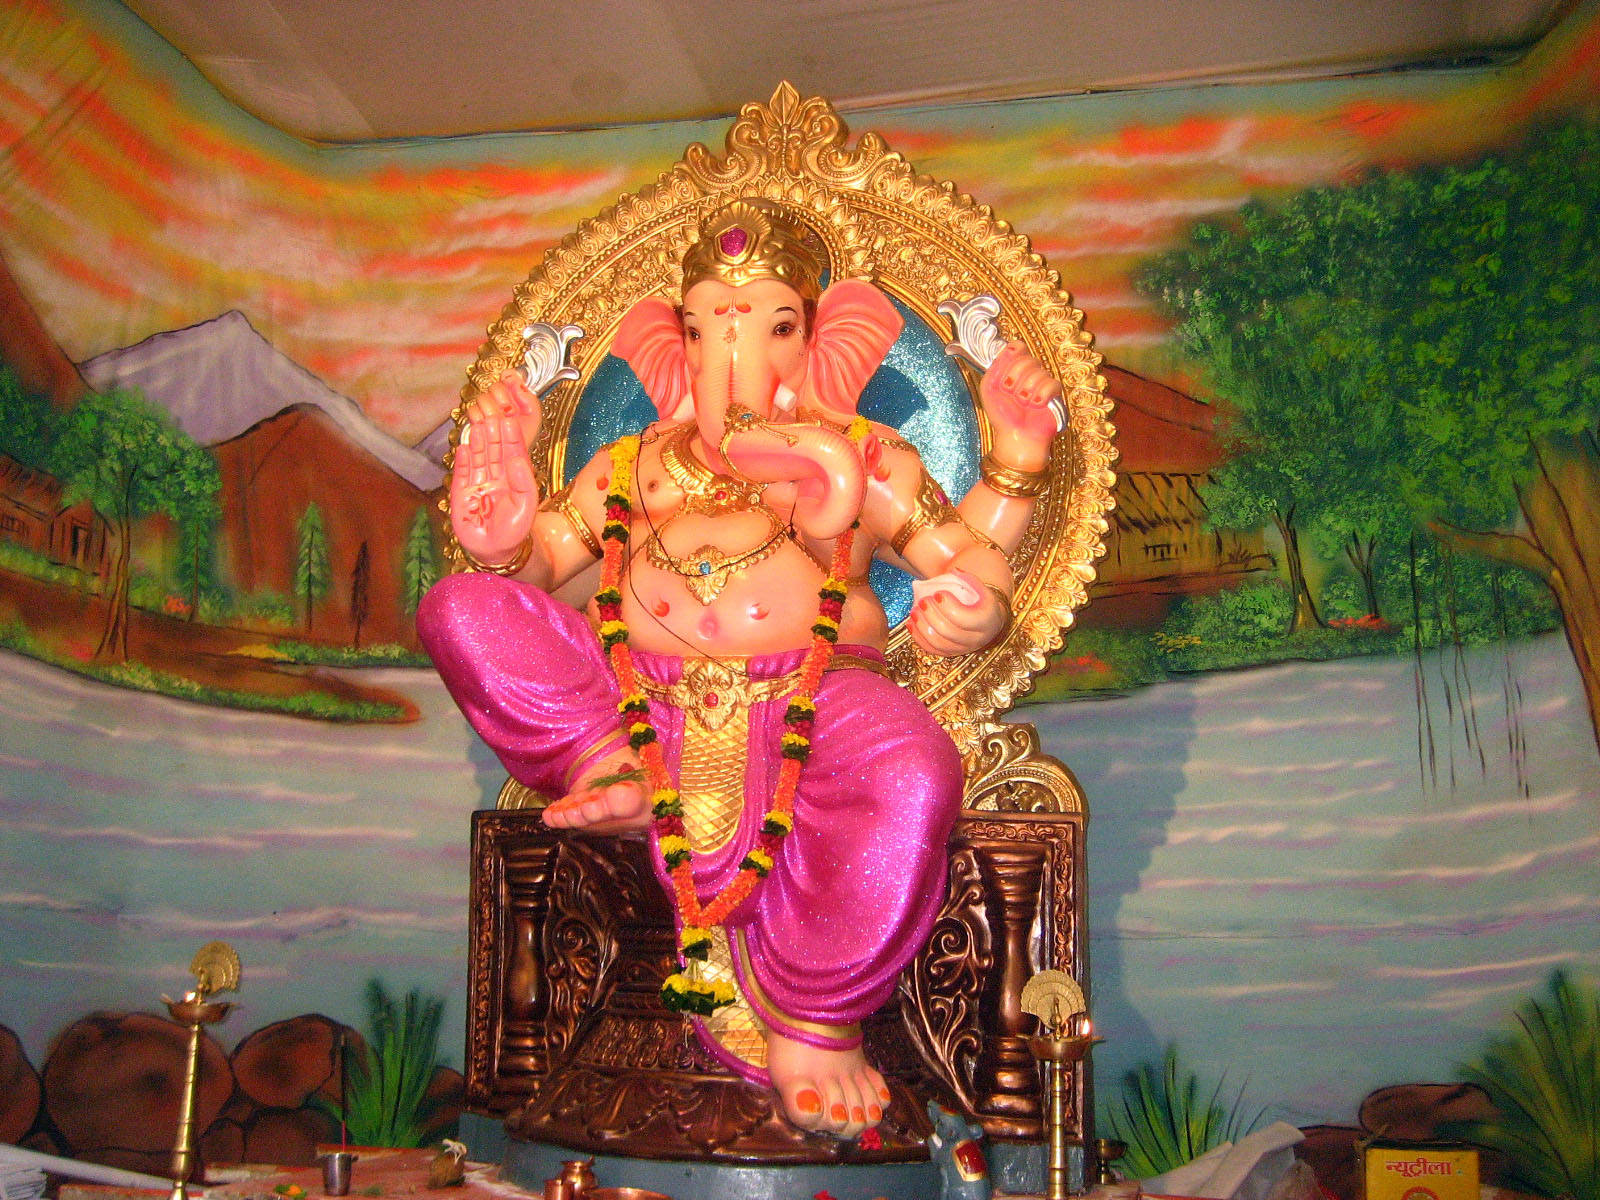 Tips for organizing the Ganesh festival in your apartment complex